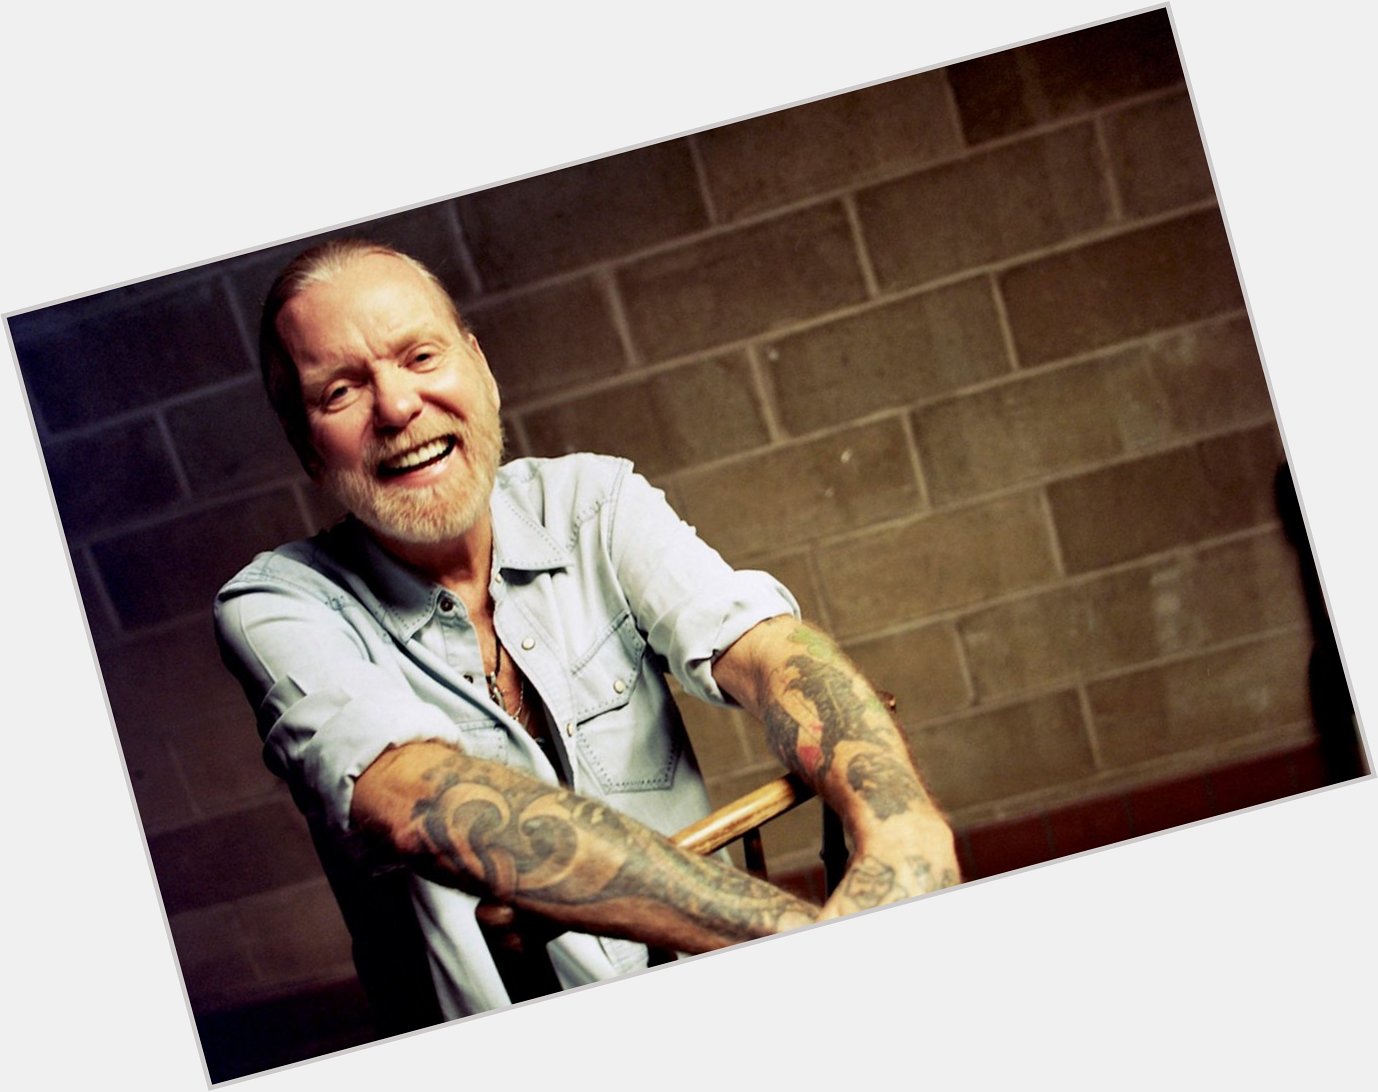 Happy birthday to the great Gregg Allman! He would have been 70 today. 